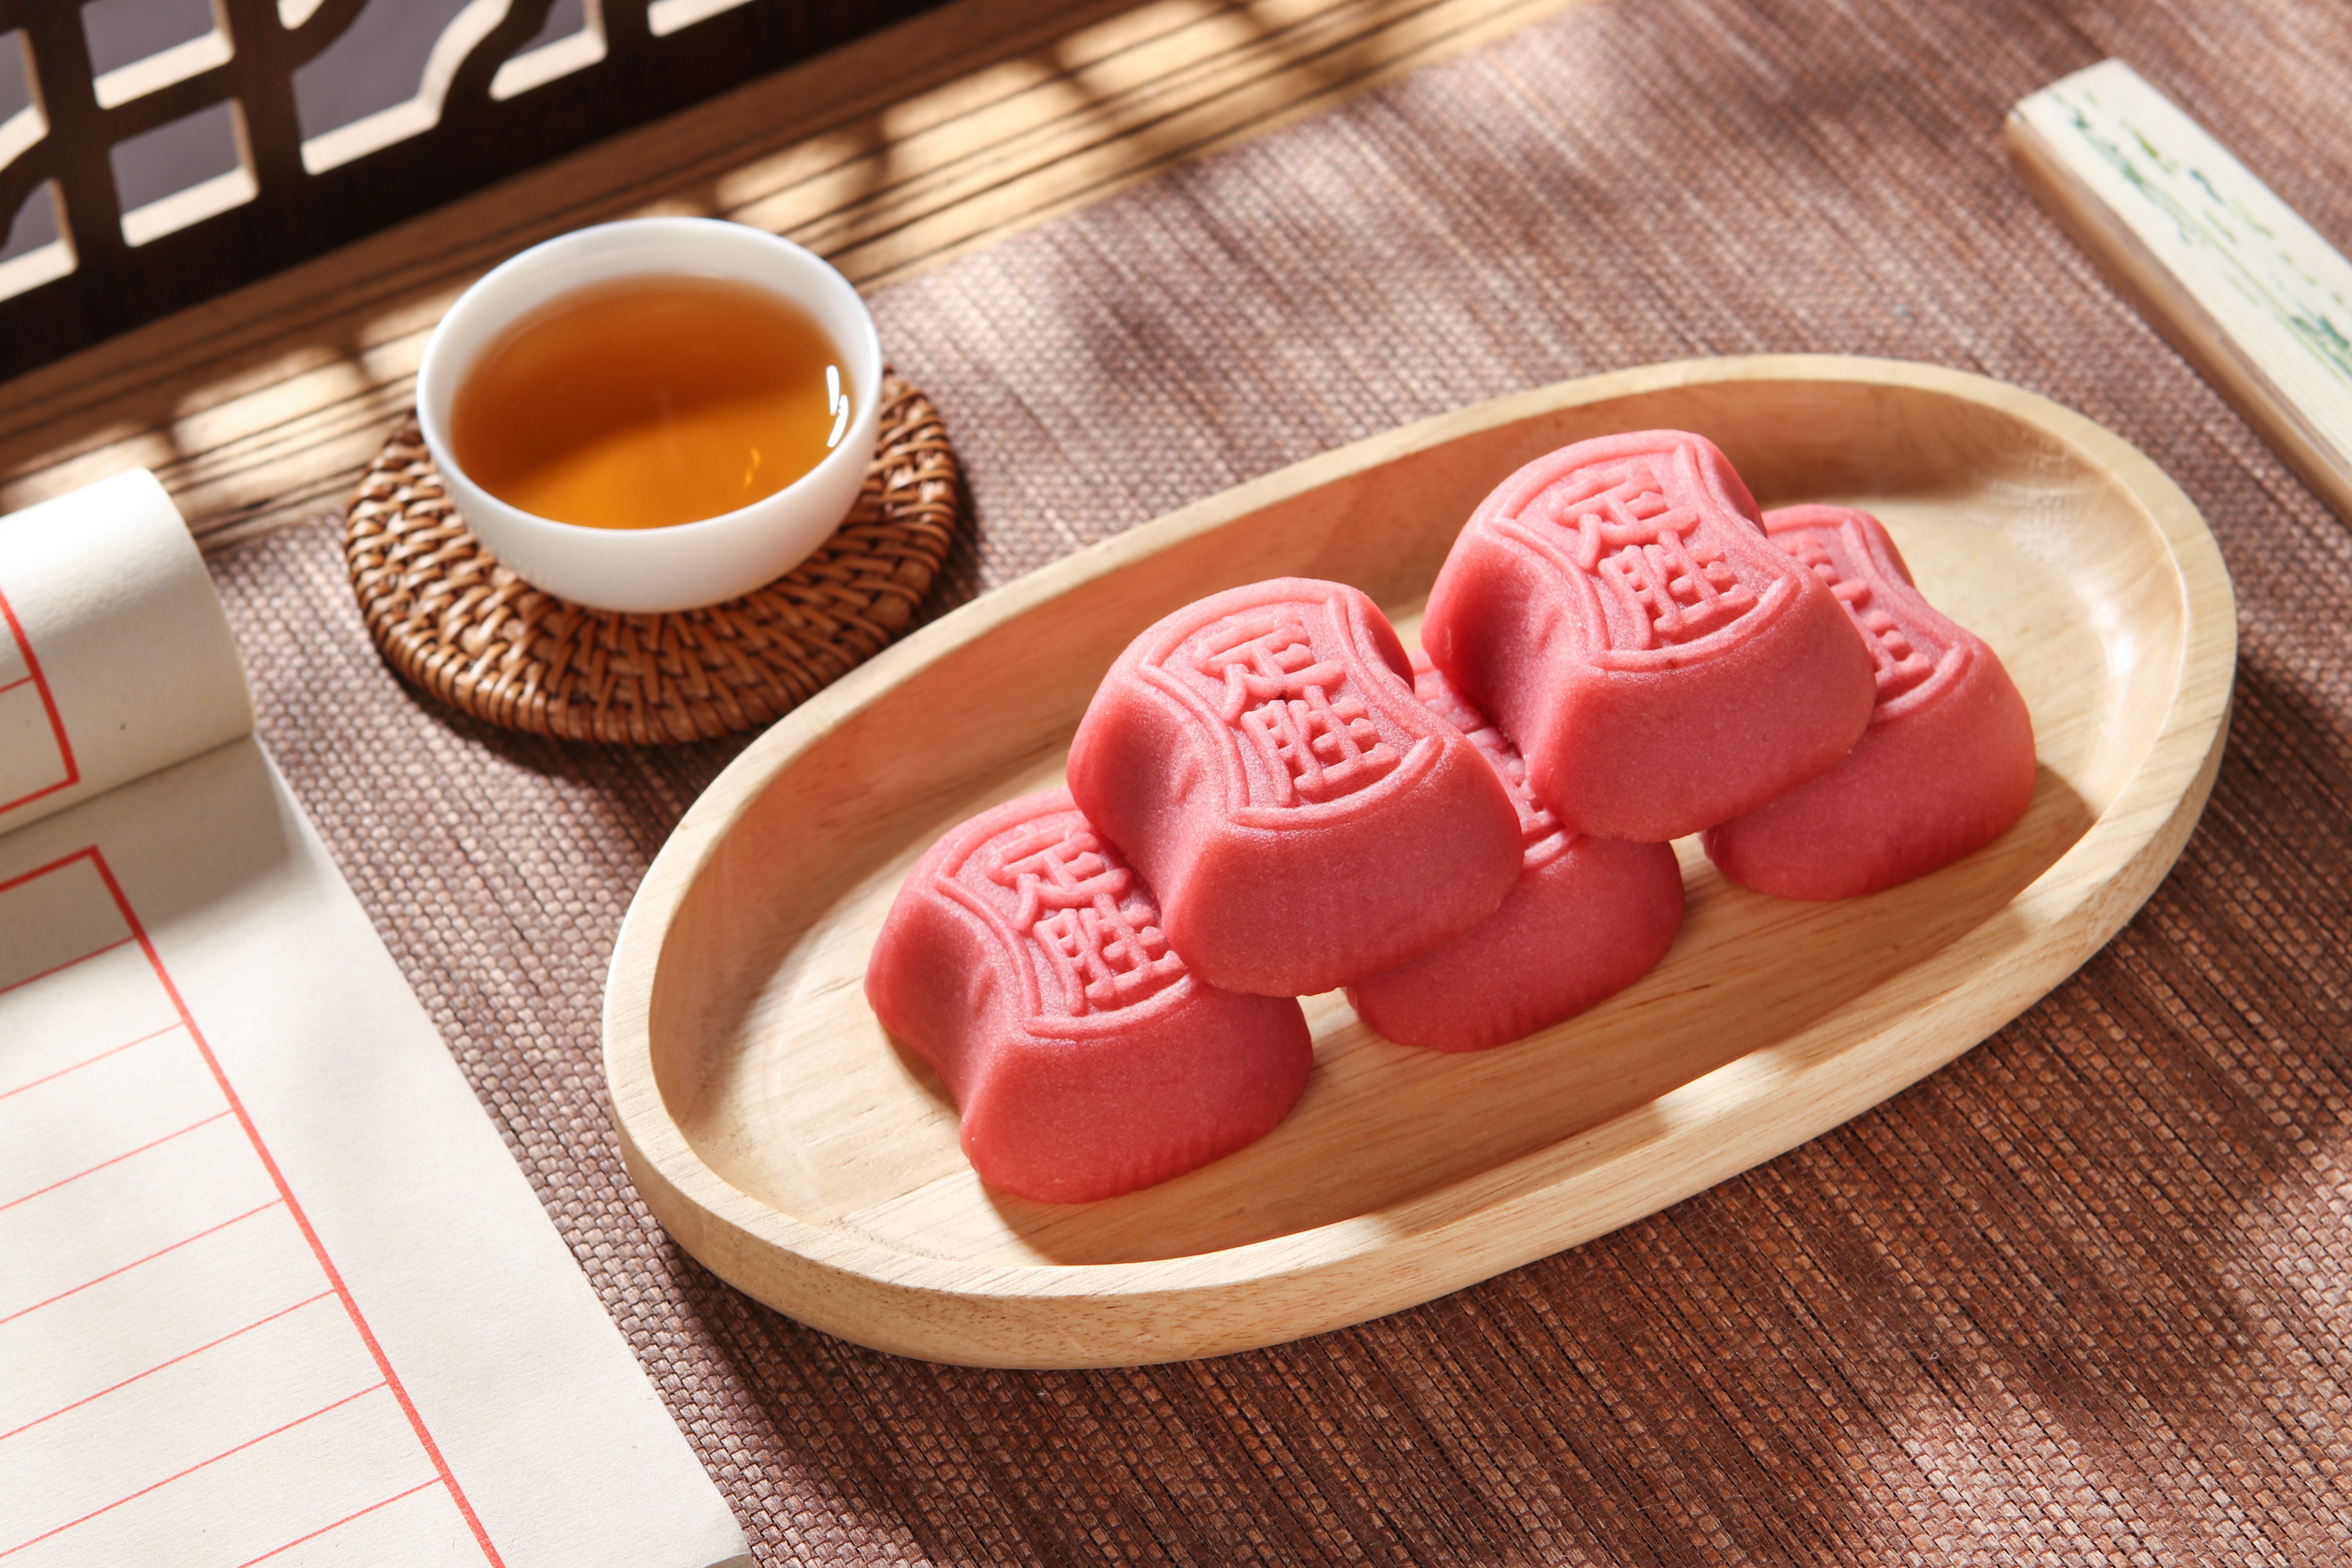 This file photo shows dingshenggao, or victory rice cakes, with the Chinese characters 